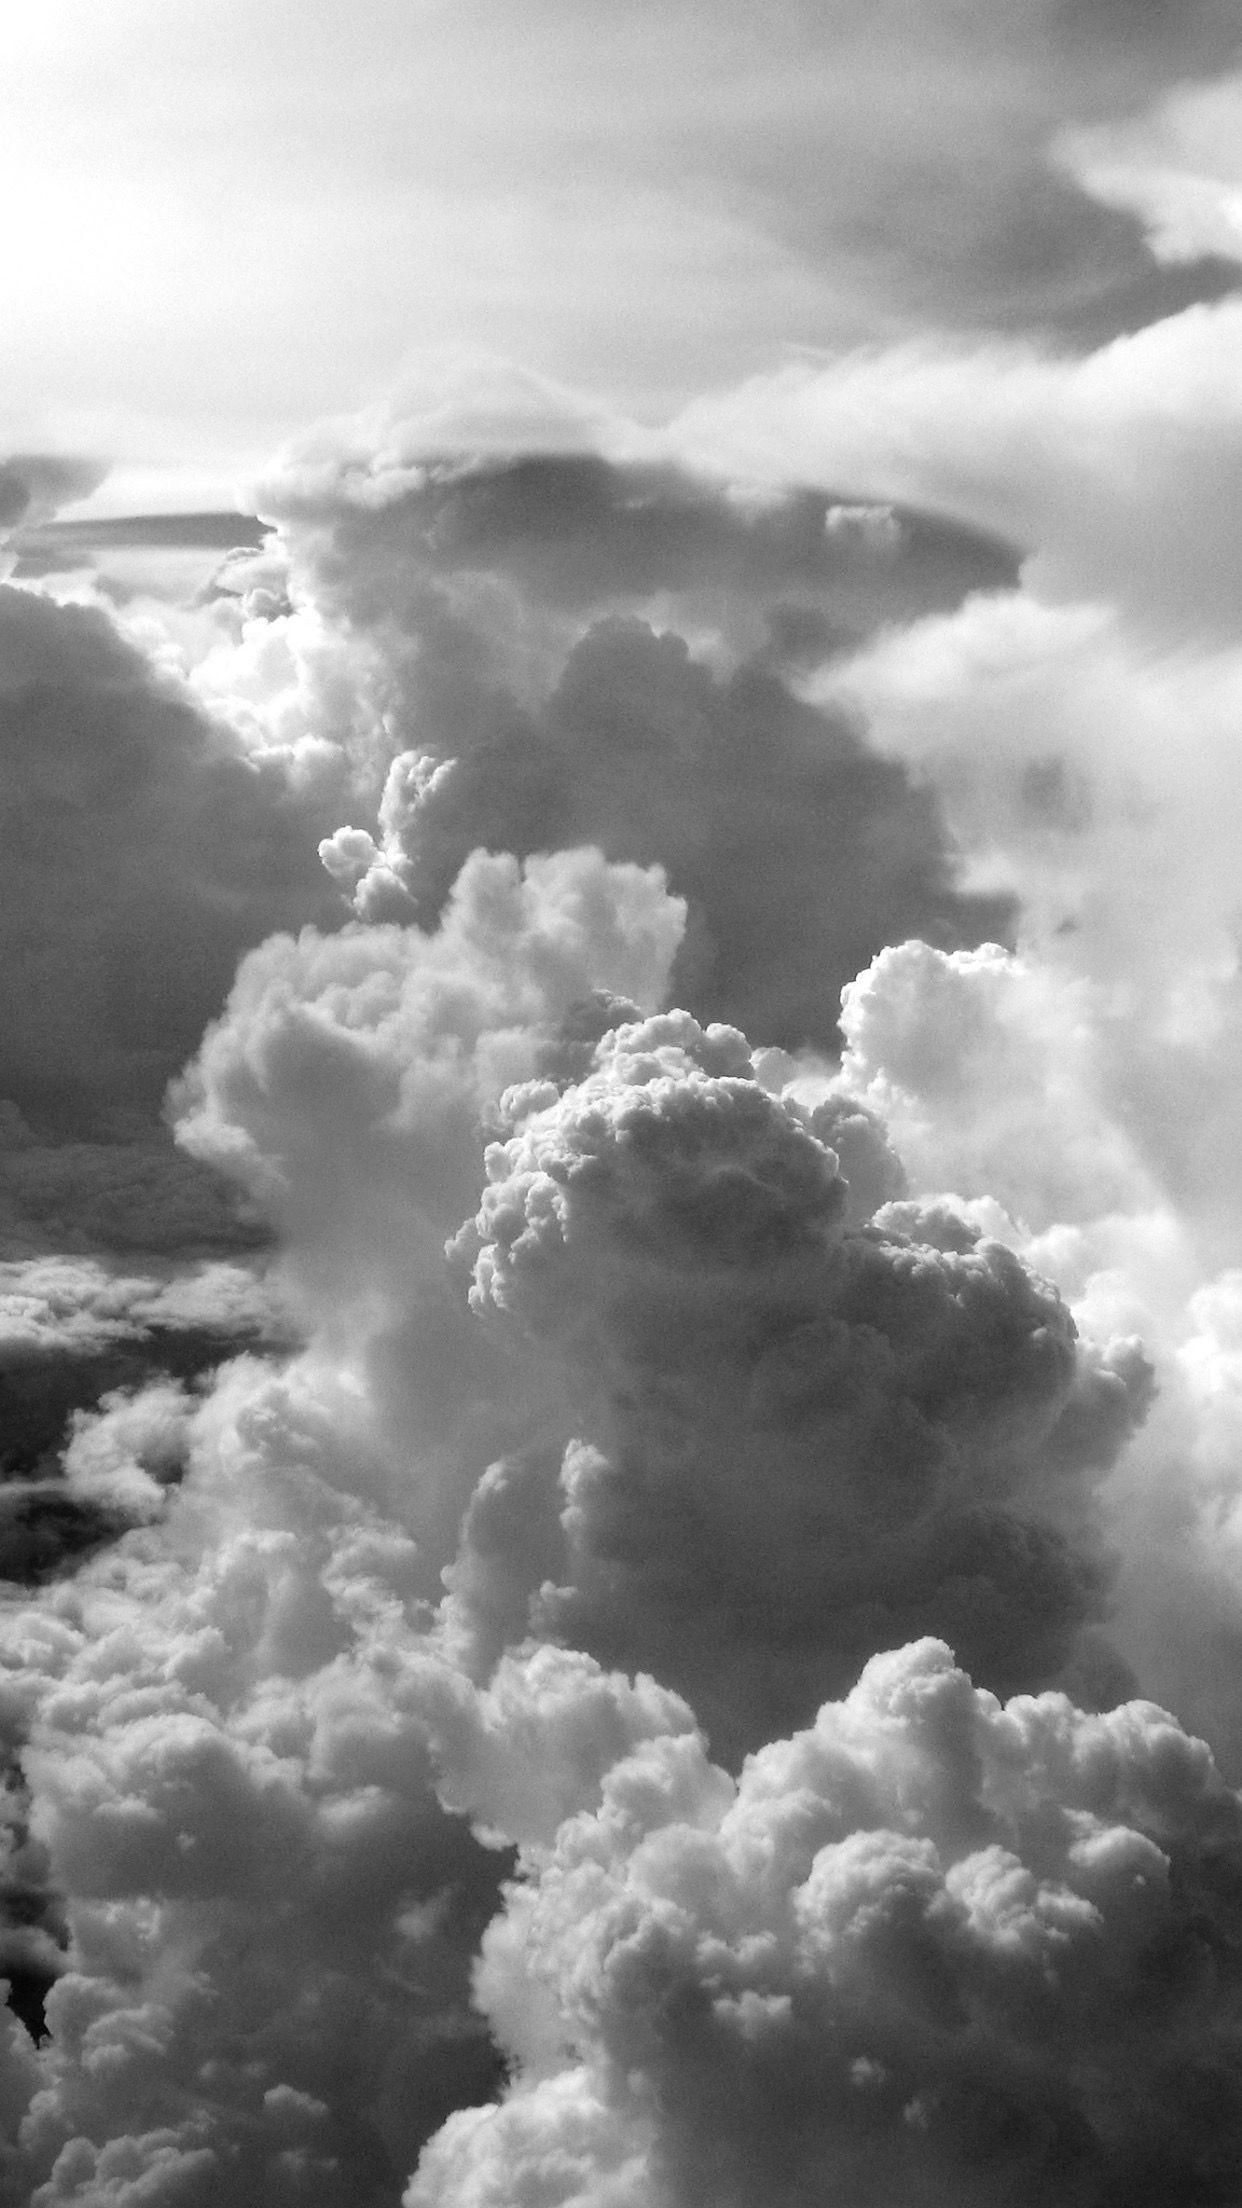 A black and white photo of clouds - Gray